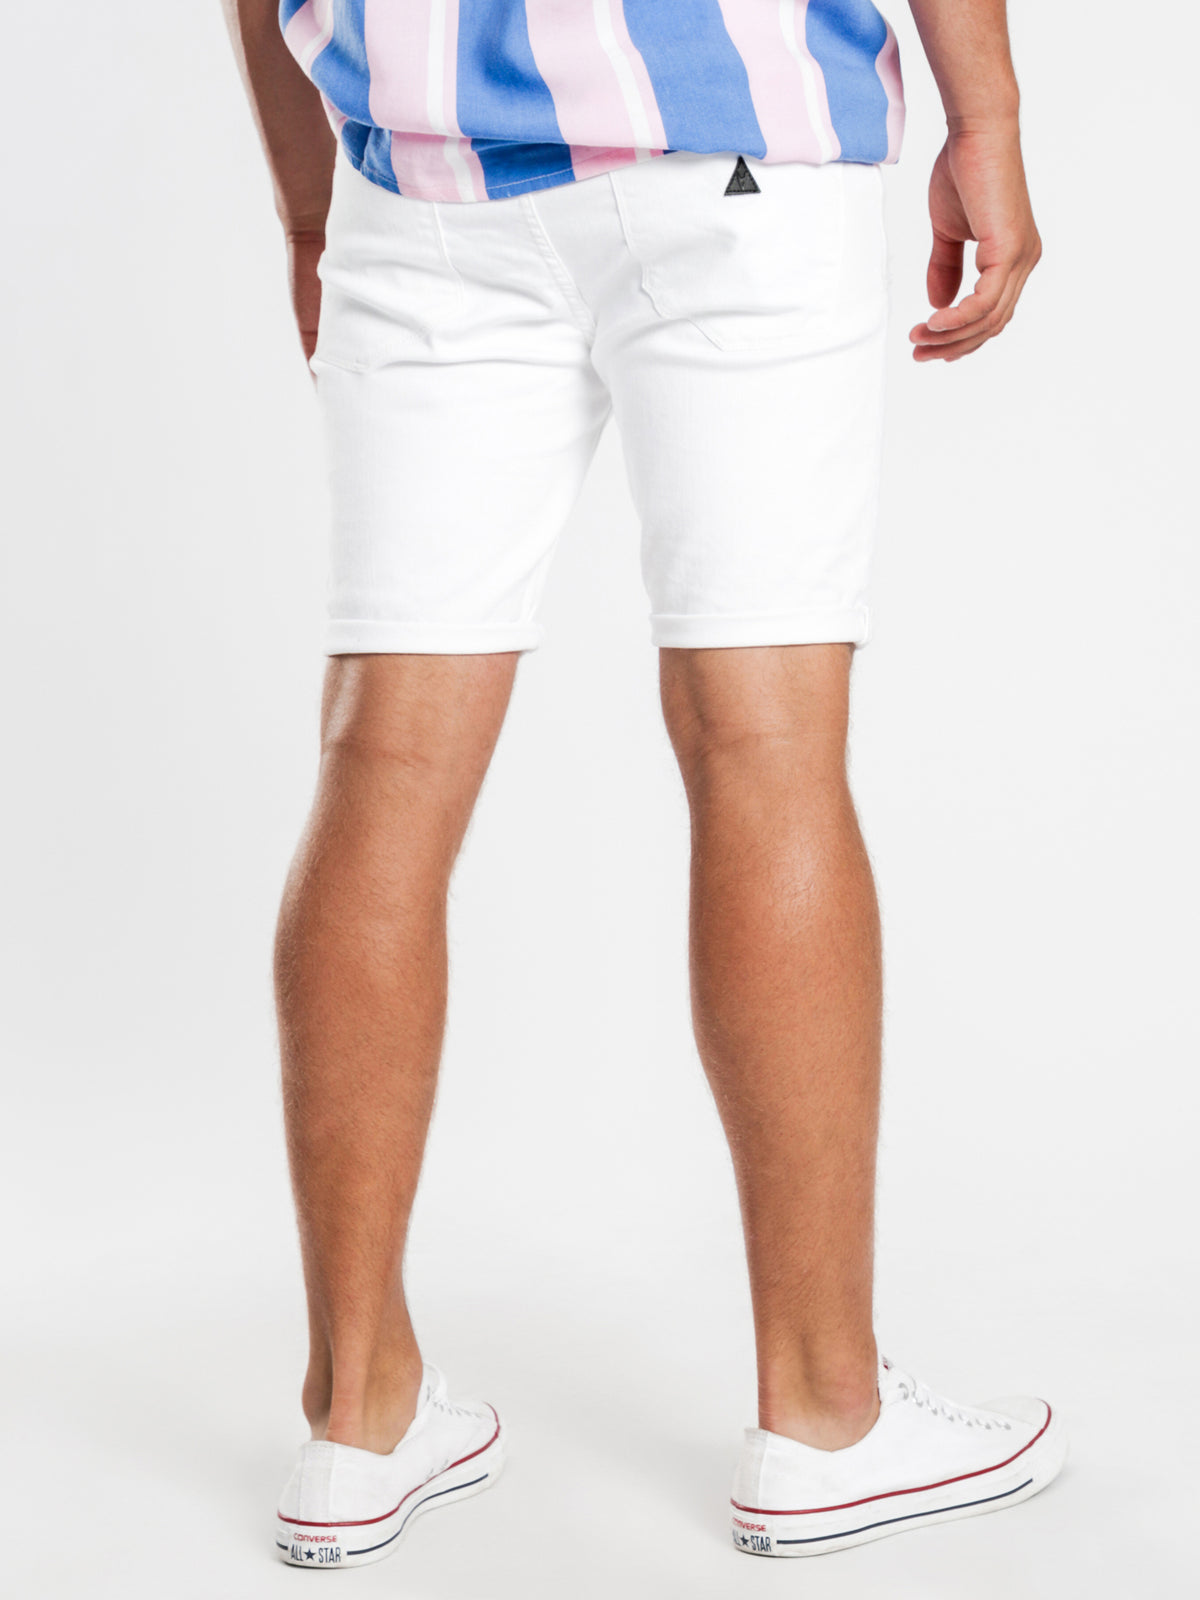 A Dropped Skinny Shorts in Rouge White Denim